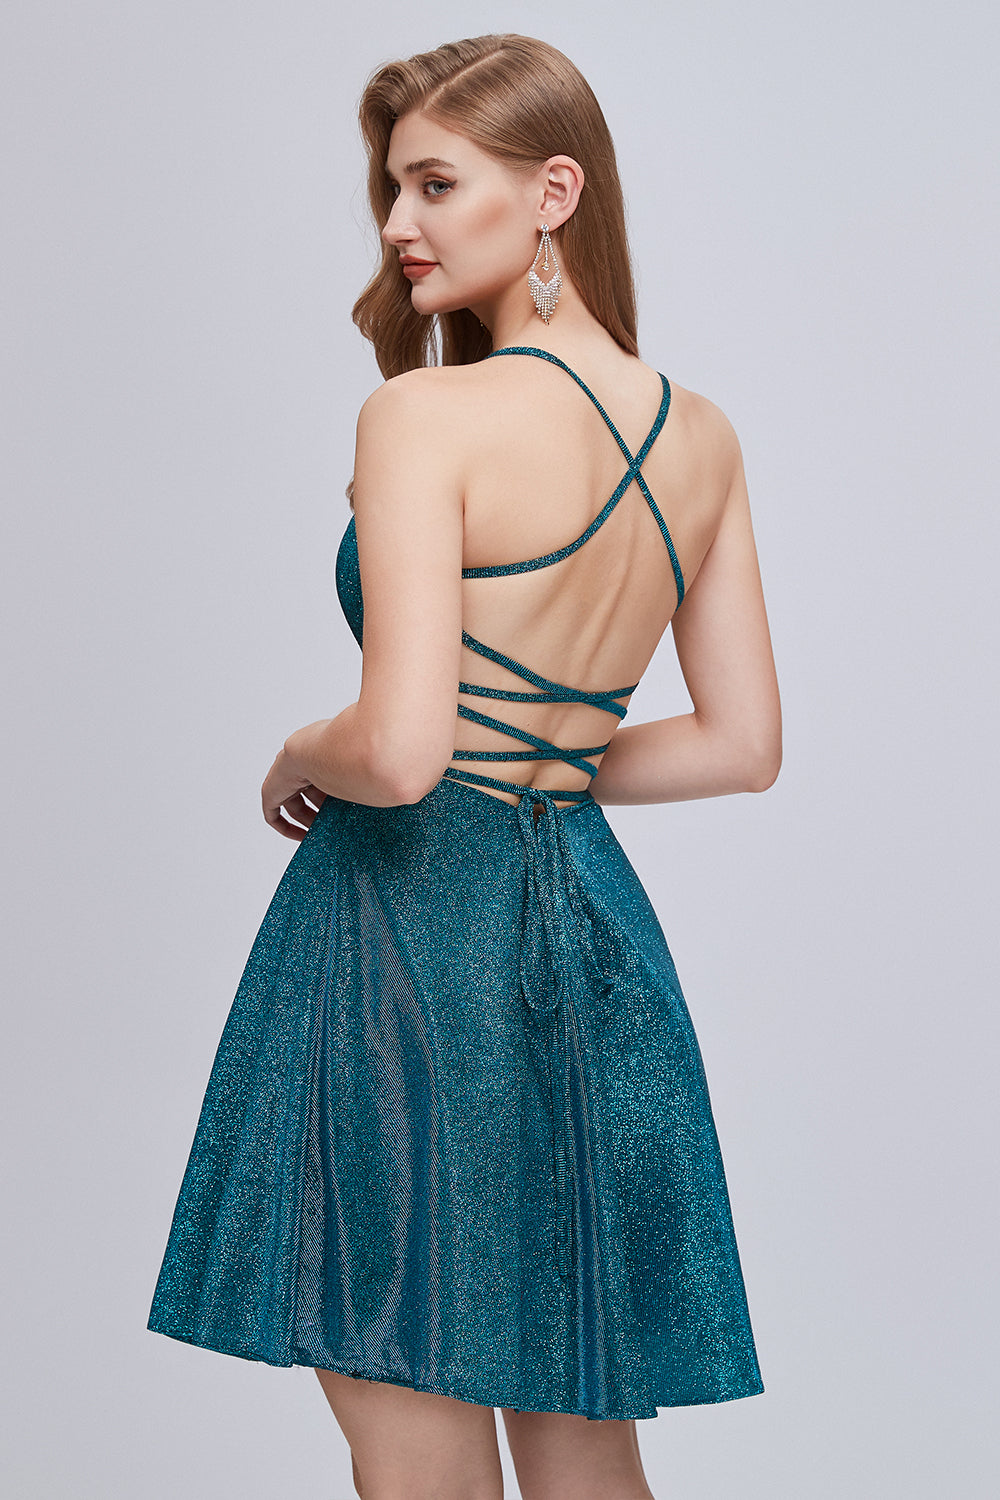 Shinning Spaghetti Strap A Line Backless Lace Up Homecoming Dresses